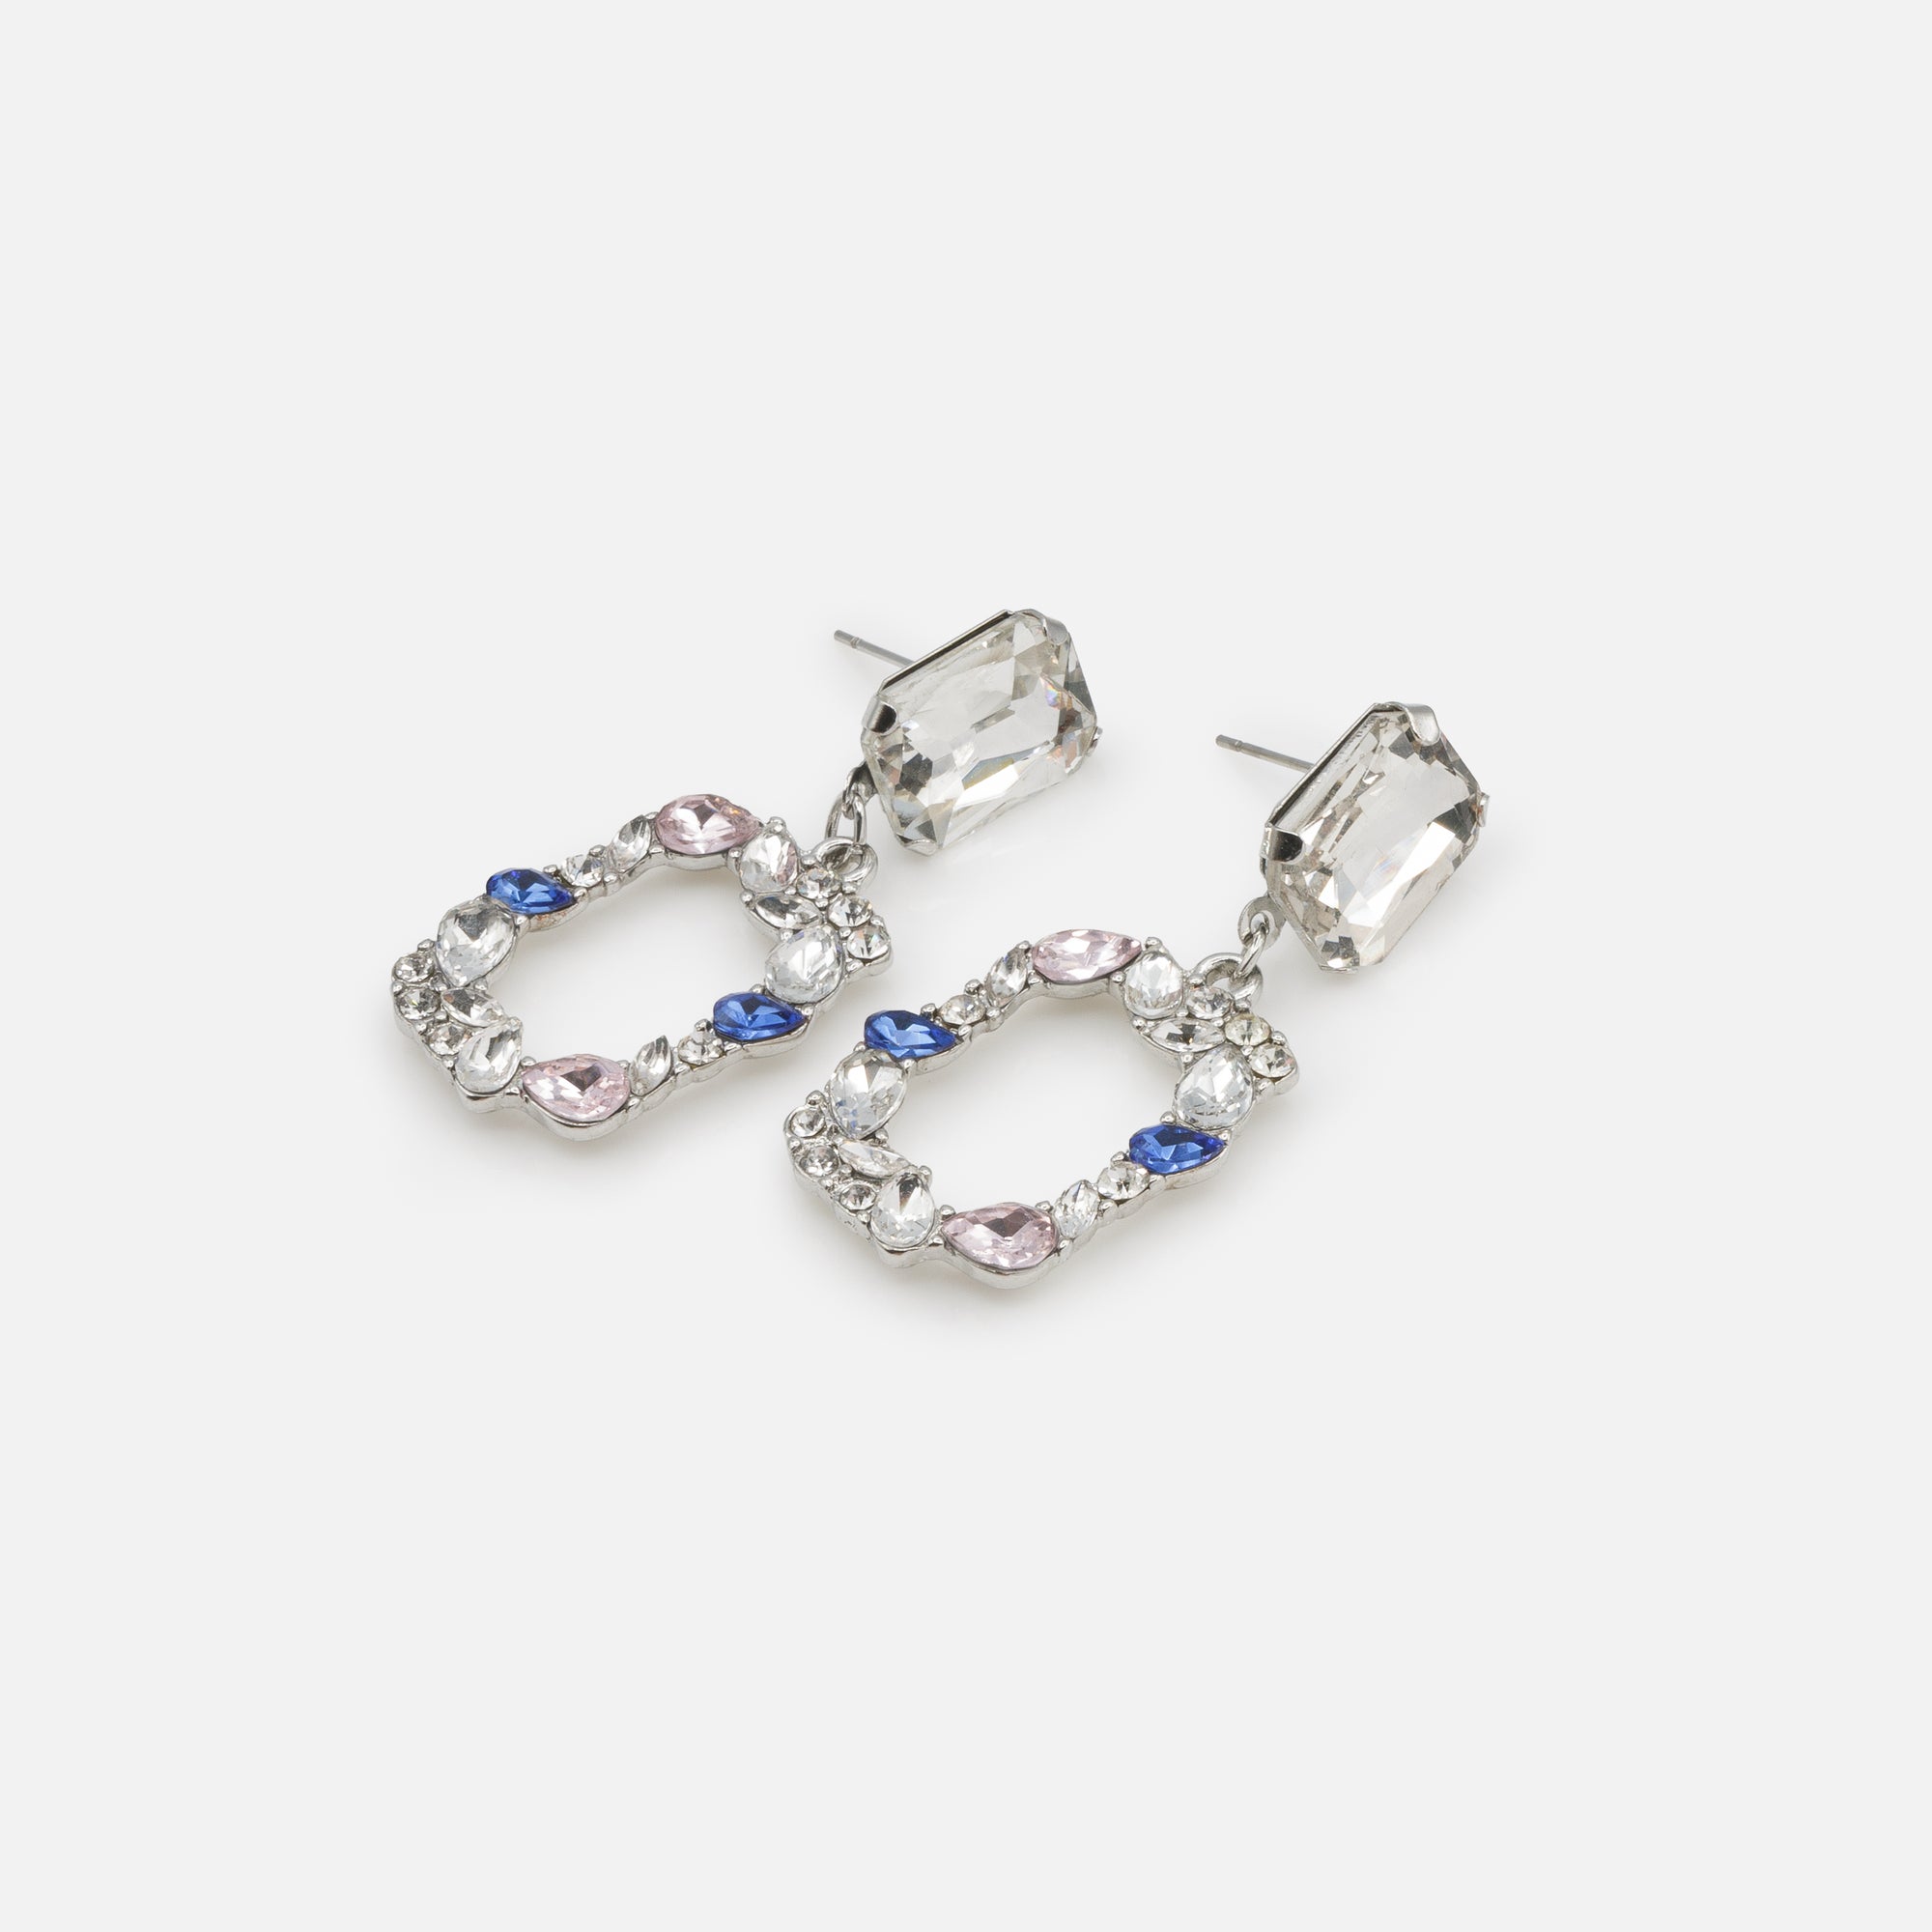 River set of cubic zirconia and silver earrings with colored stones